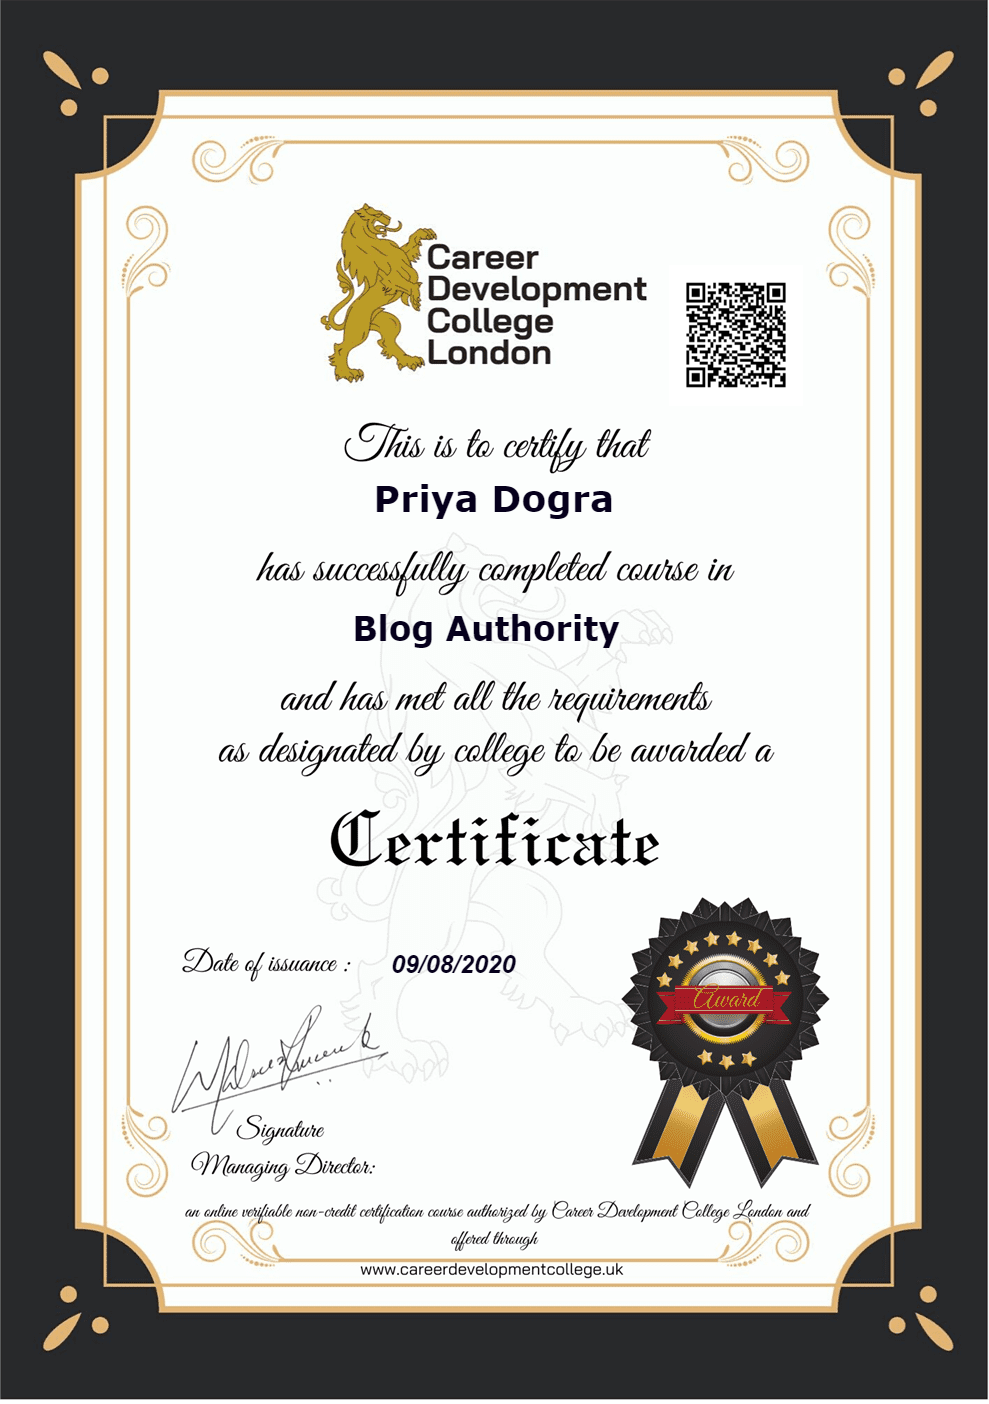 Career Development College London Free Online Course with Certificate